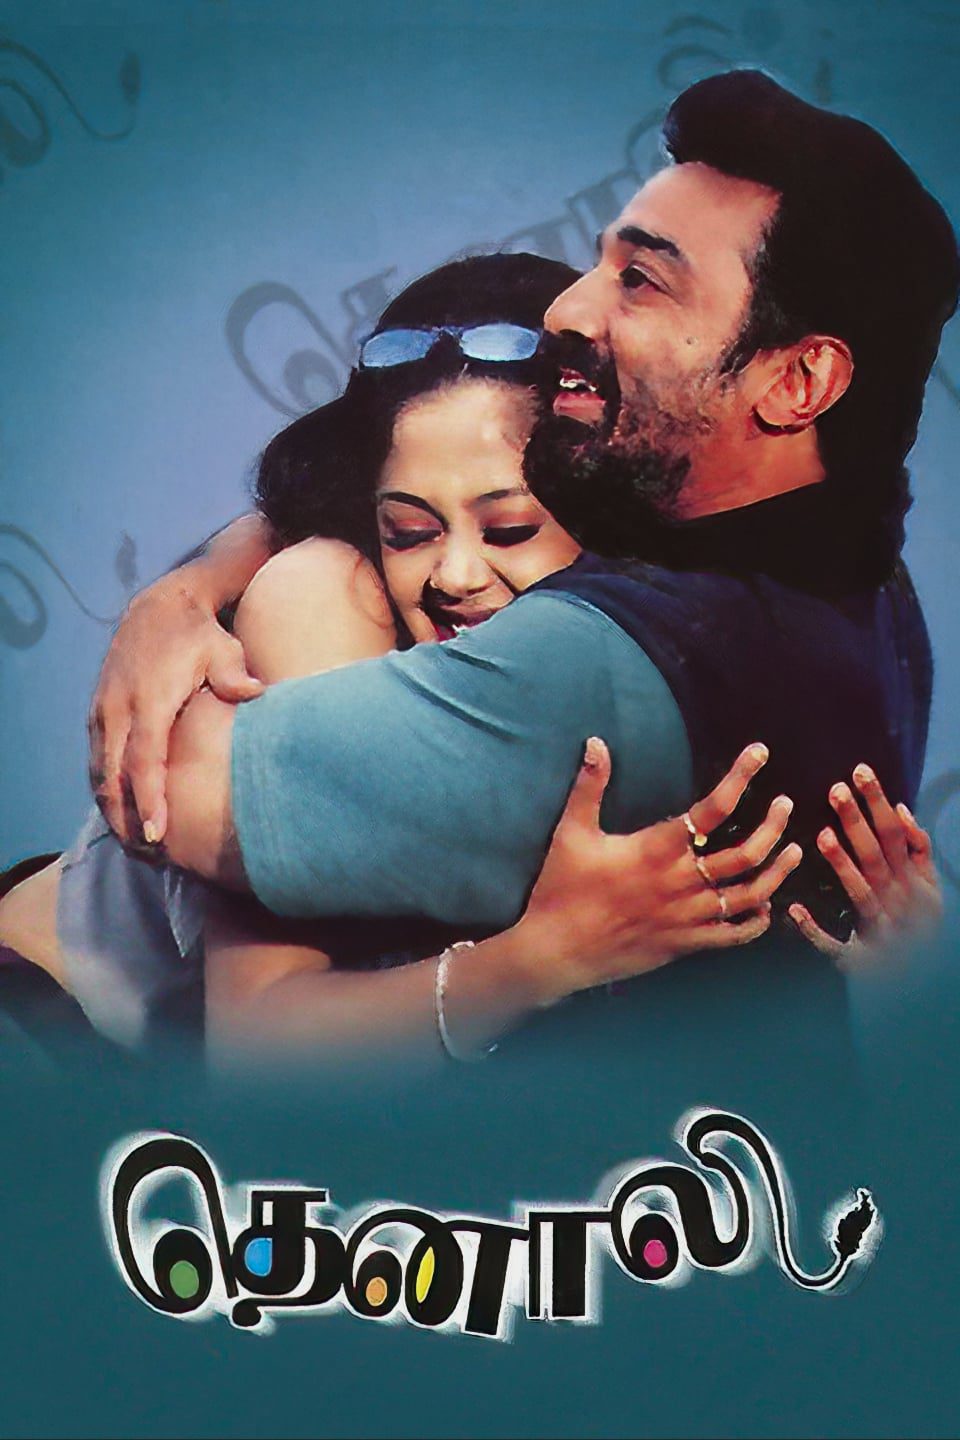 Poster for the movie "Thenali"